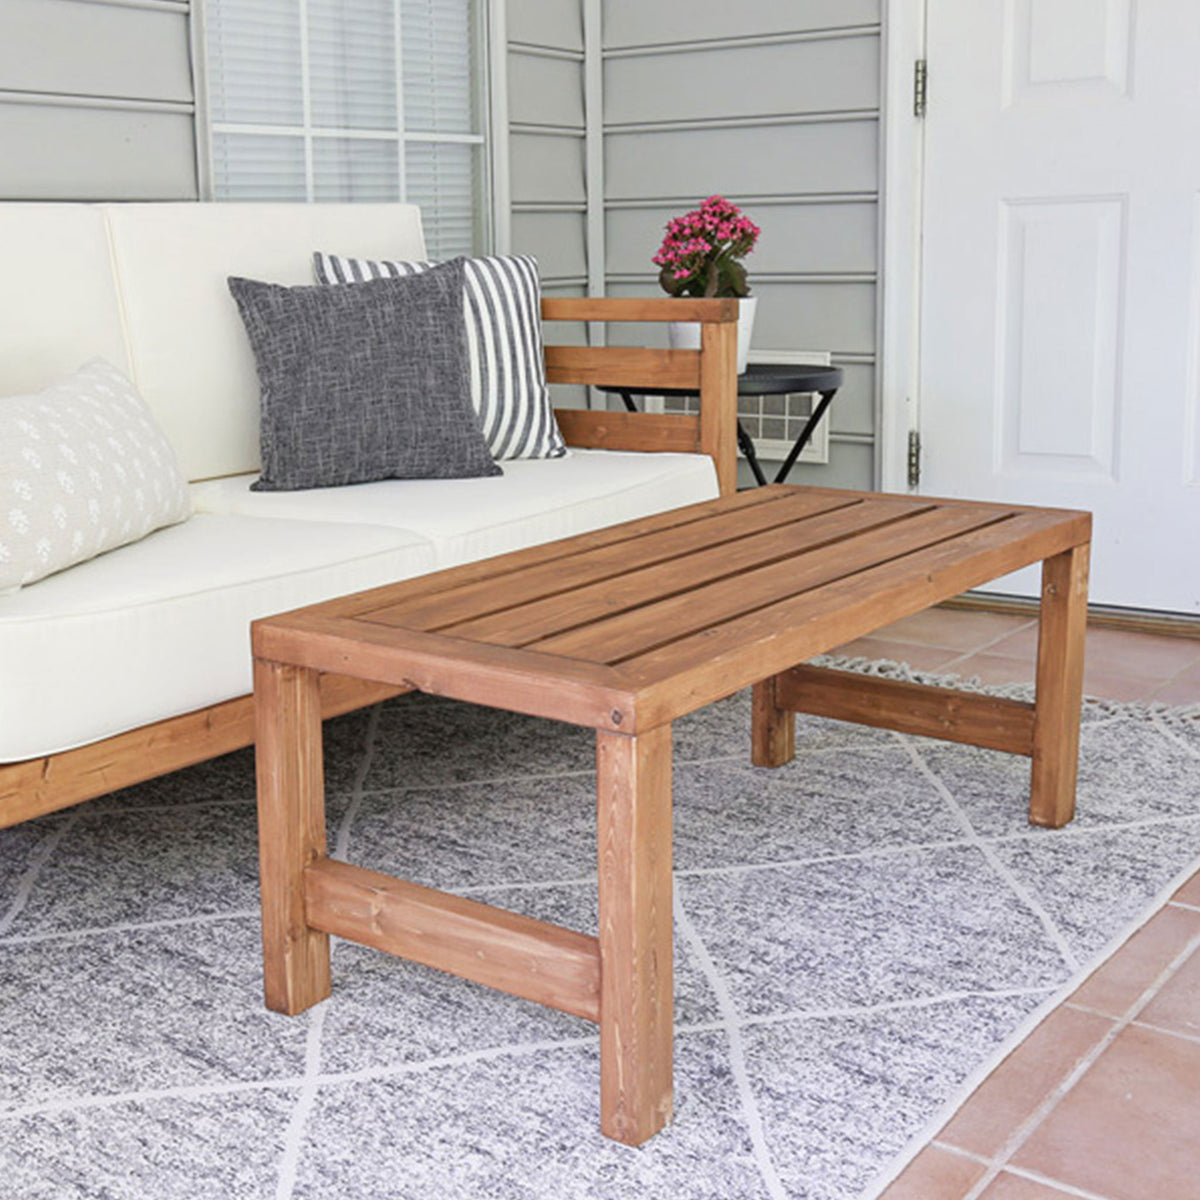 How to make outdoor coffee table